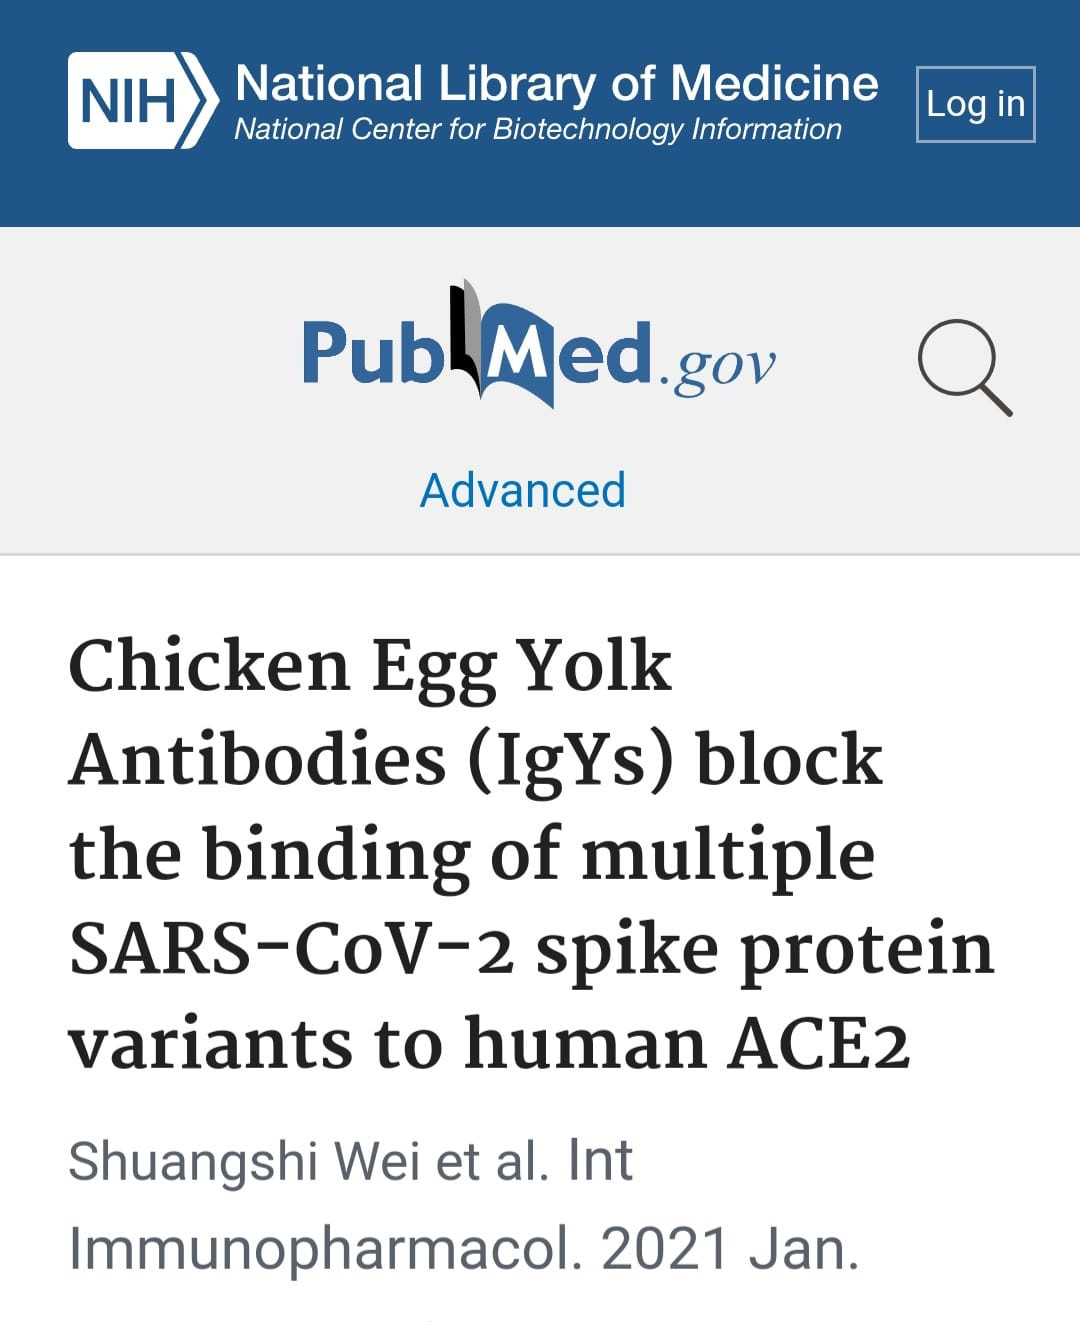 May be an image of text that says 'NIH National Library of Medicine National Center for Biotechnology Information Log Pub Med Med.gov gov Advanced Chicken Egg Yolk Antibodies (IgYs) block the binding of multiple SARS-CoV-2 spike protein variants to human ACE2 Shuangshi Wei et al. Int Immunopharmacol. 2021 Jan.'